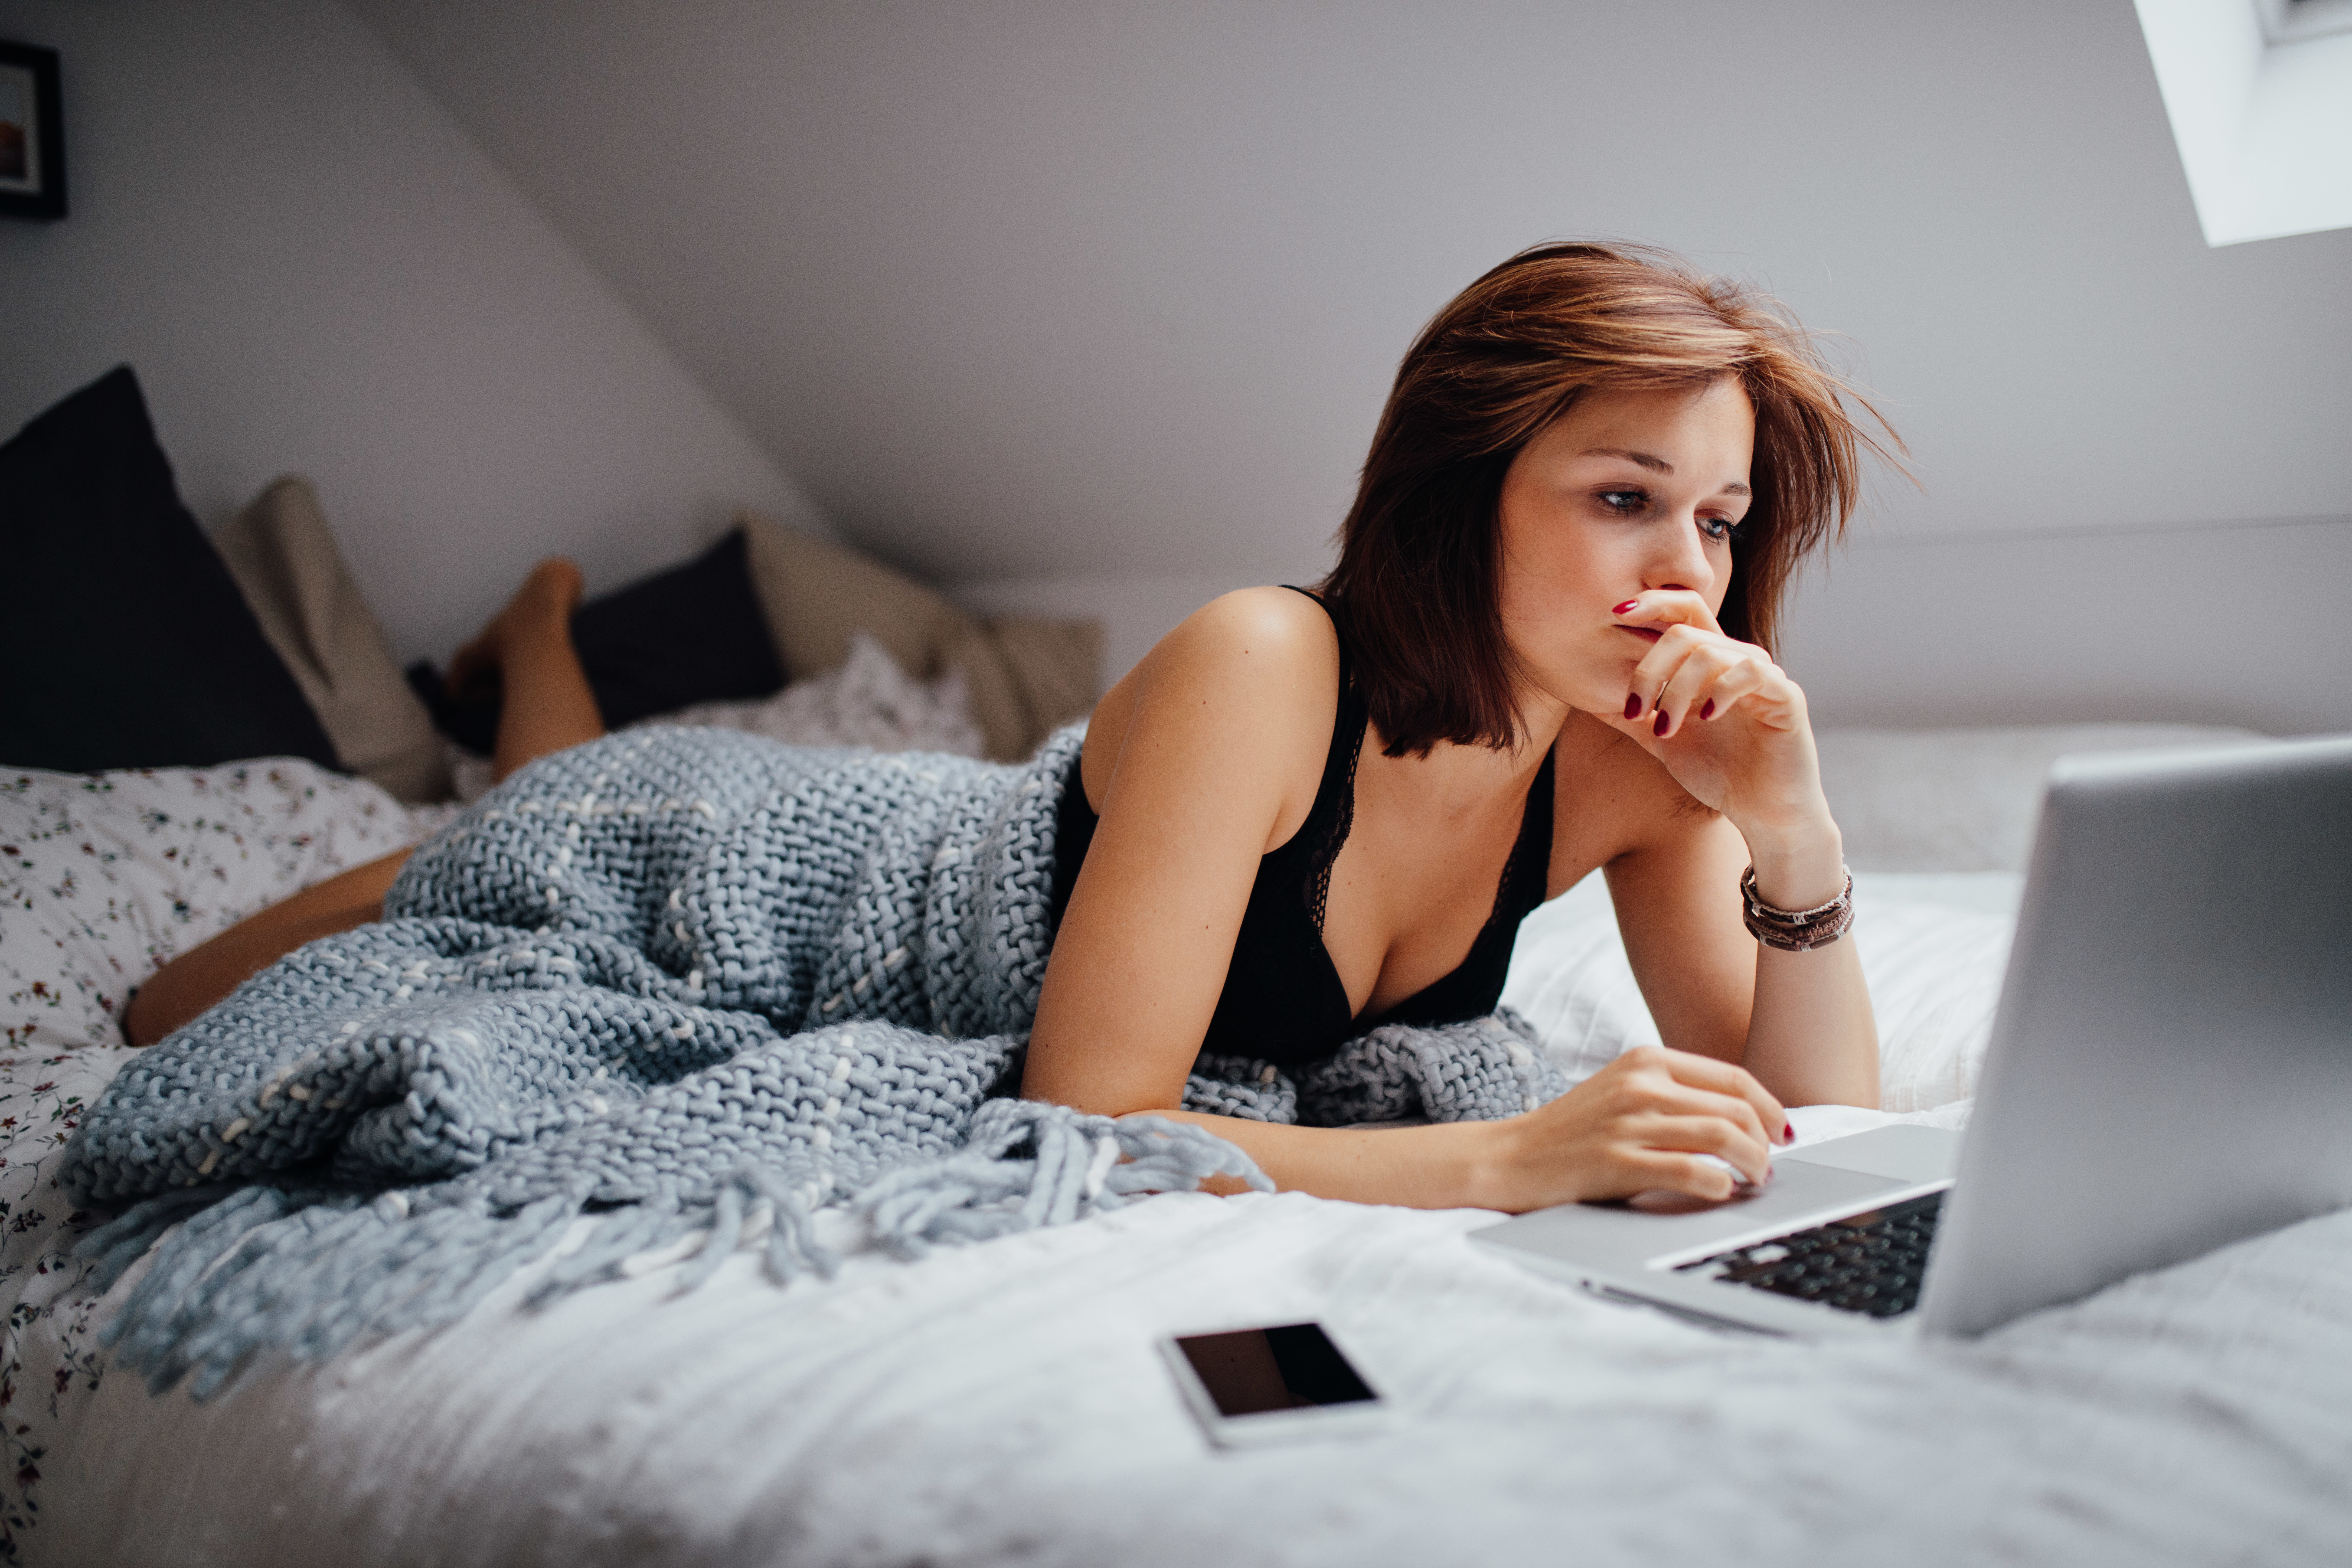 Develop-University-young-woman-studying-with-laptop-on-bed